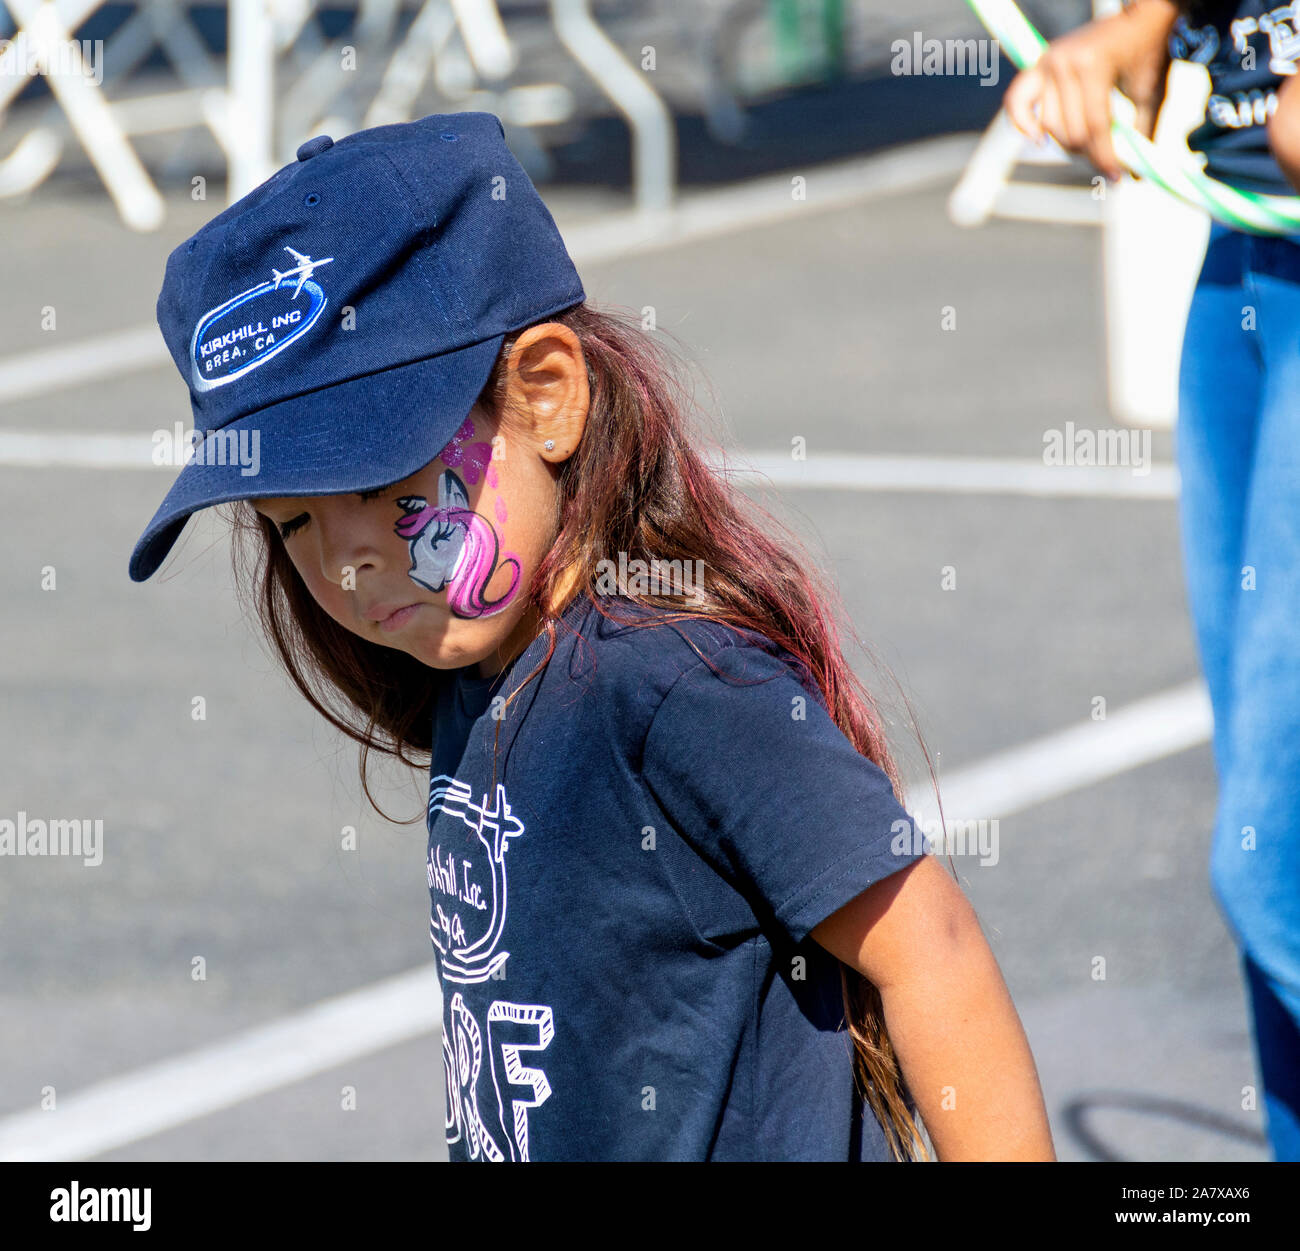 Anaheim, CA / USA - Nov 3, 2019: Pink and white face paint looks very cute on a pretty, long-haired girl. Stock Photo